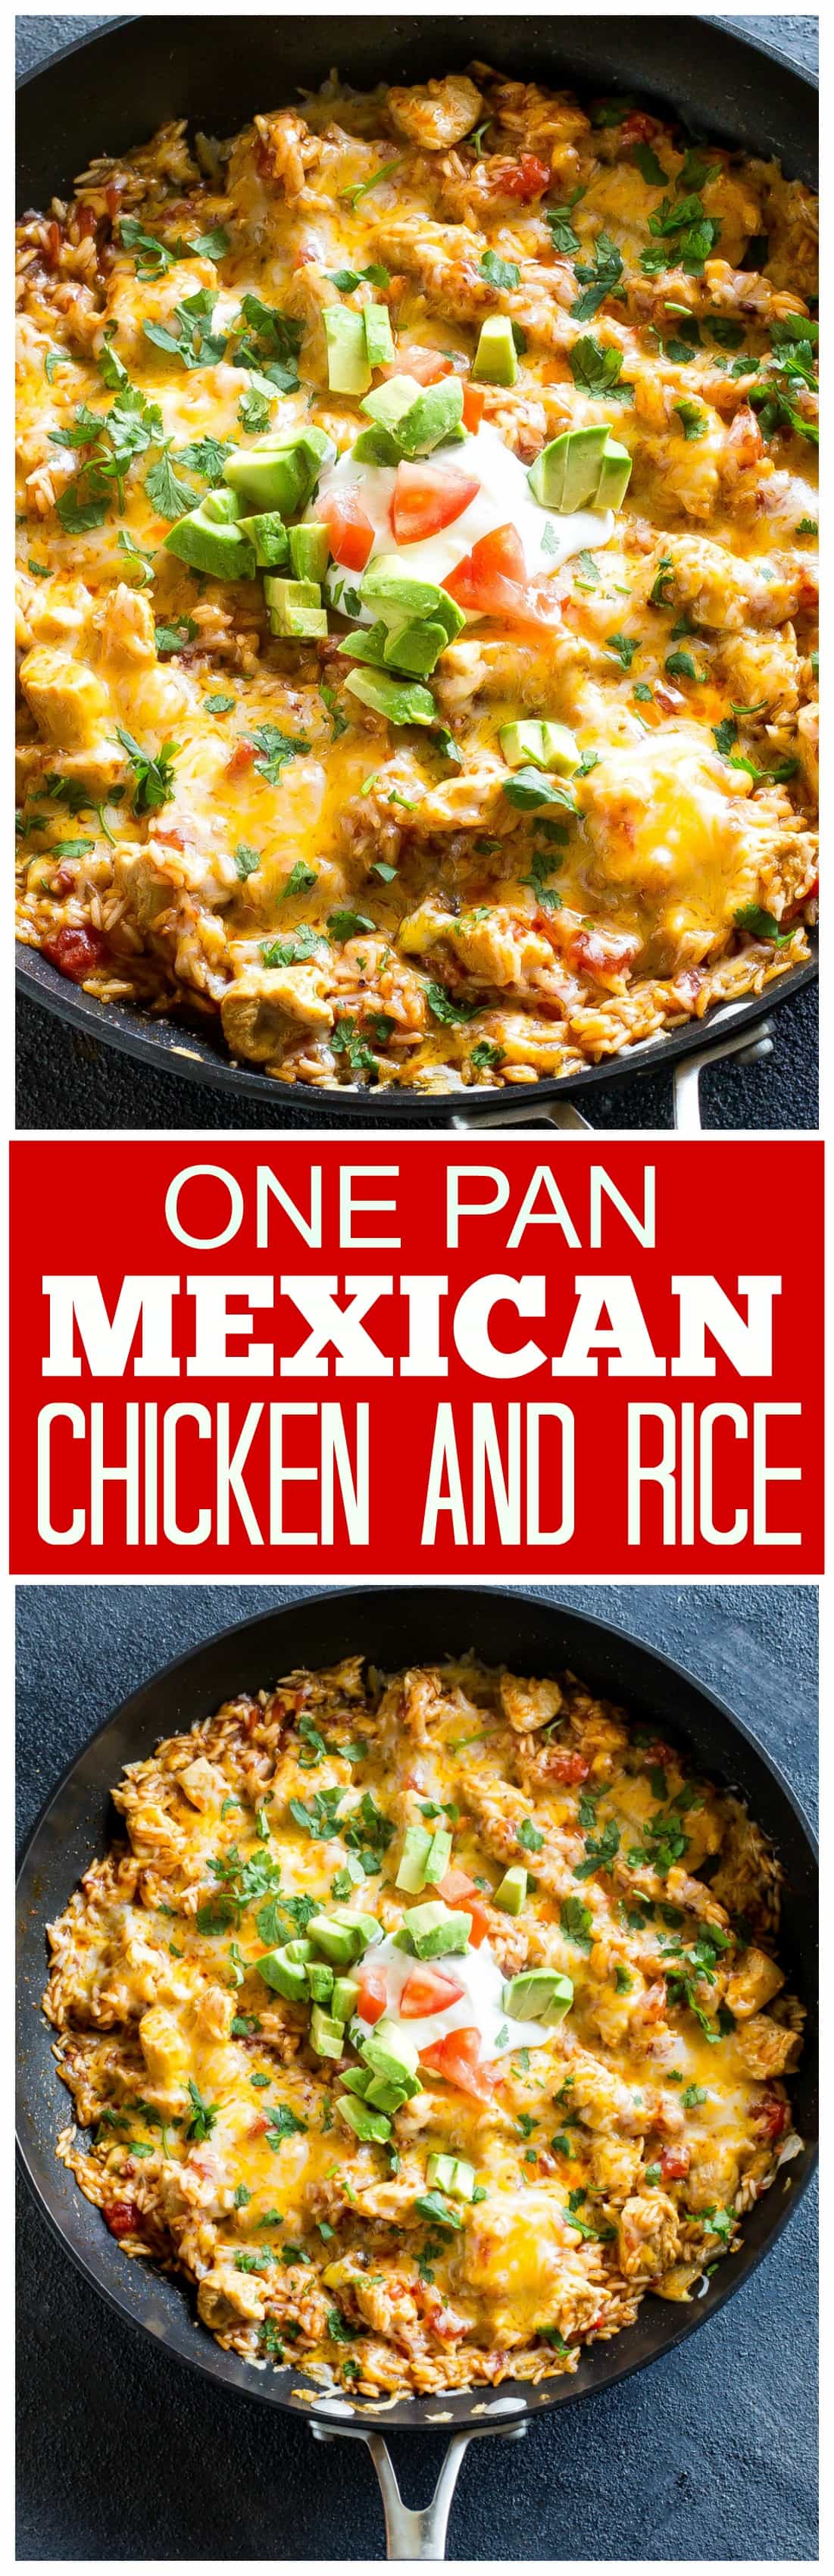 https://www.the-girl-who-ate-everything.com/wp-content/uploads/2017/02/one-pan-mexican-chicken-rice.jpg